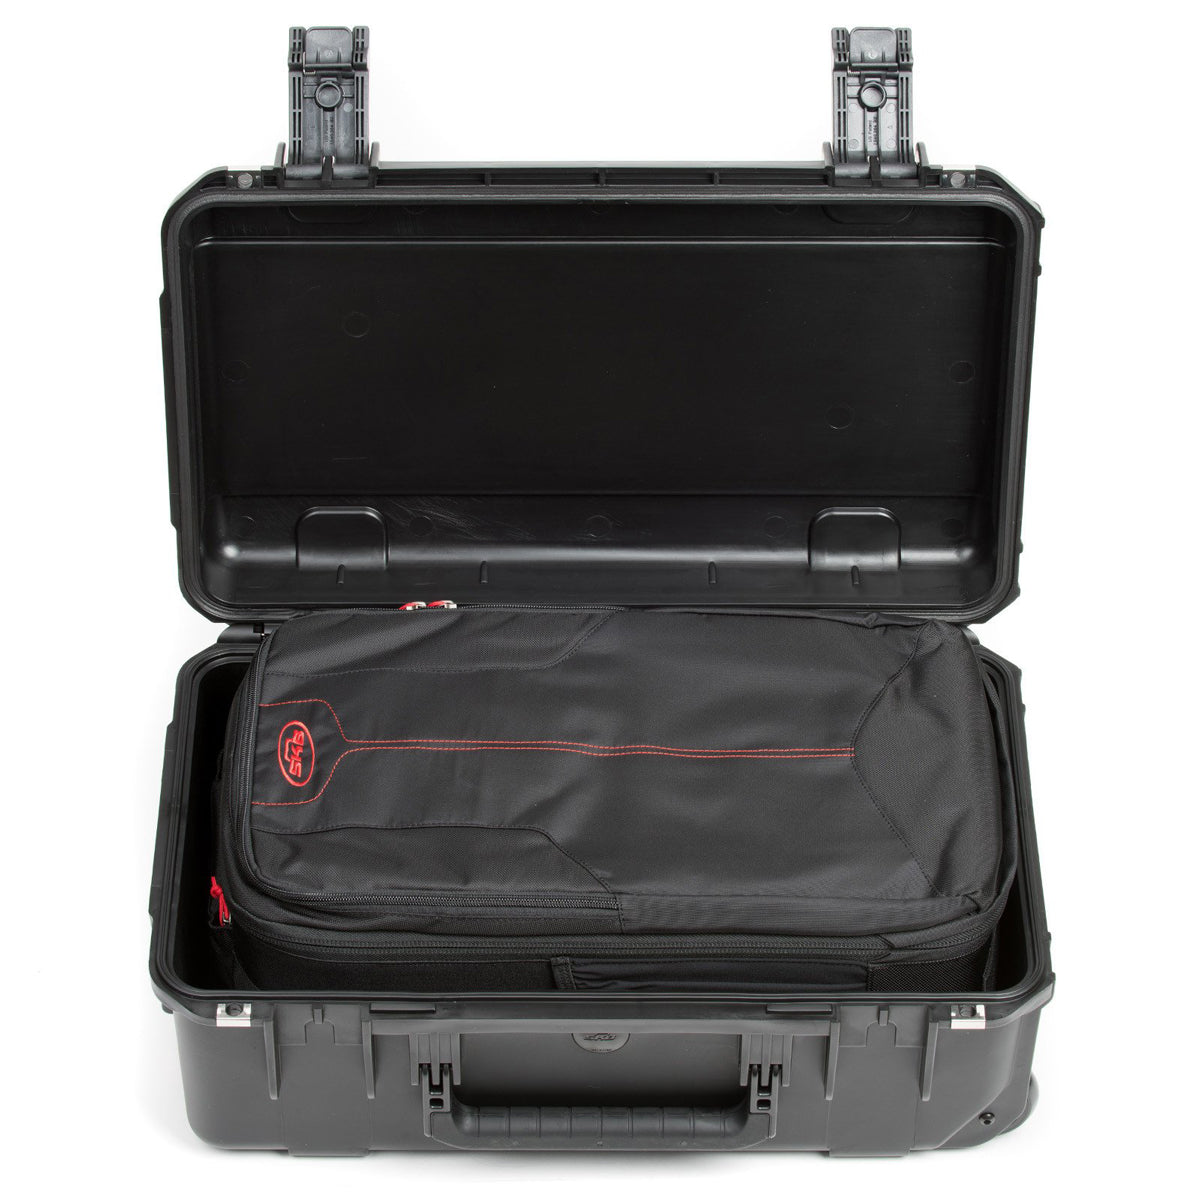 SKB iSeries 2011-7 Case with Think Tank Design Photo Backpack (Black)